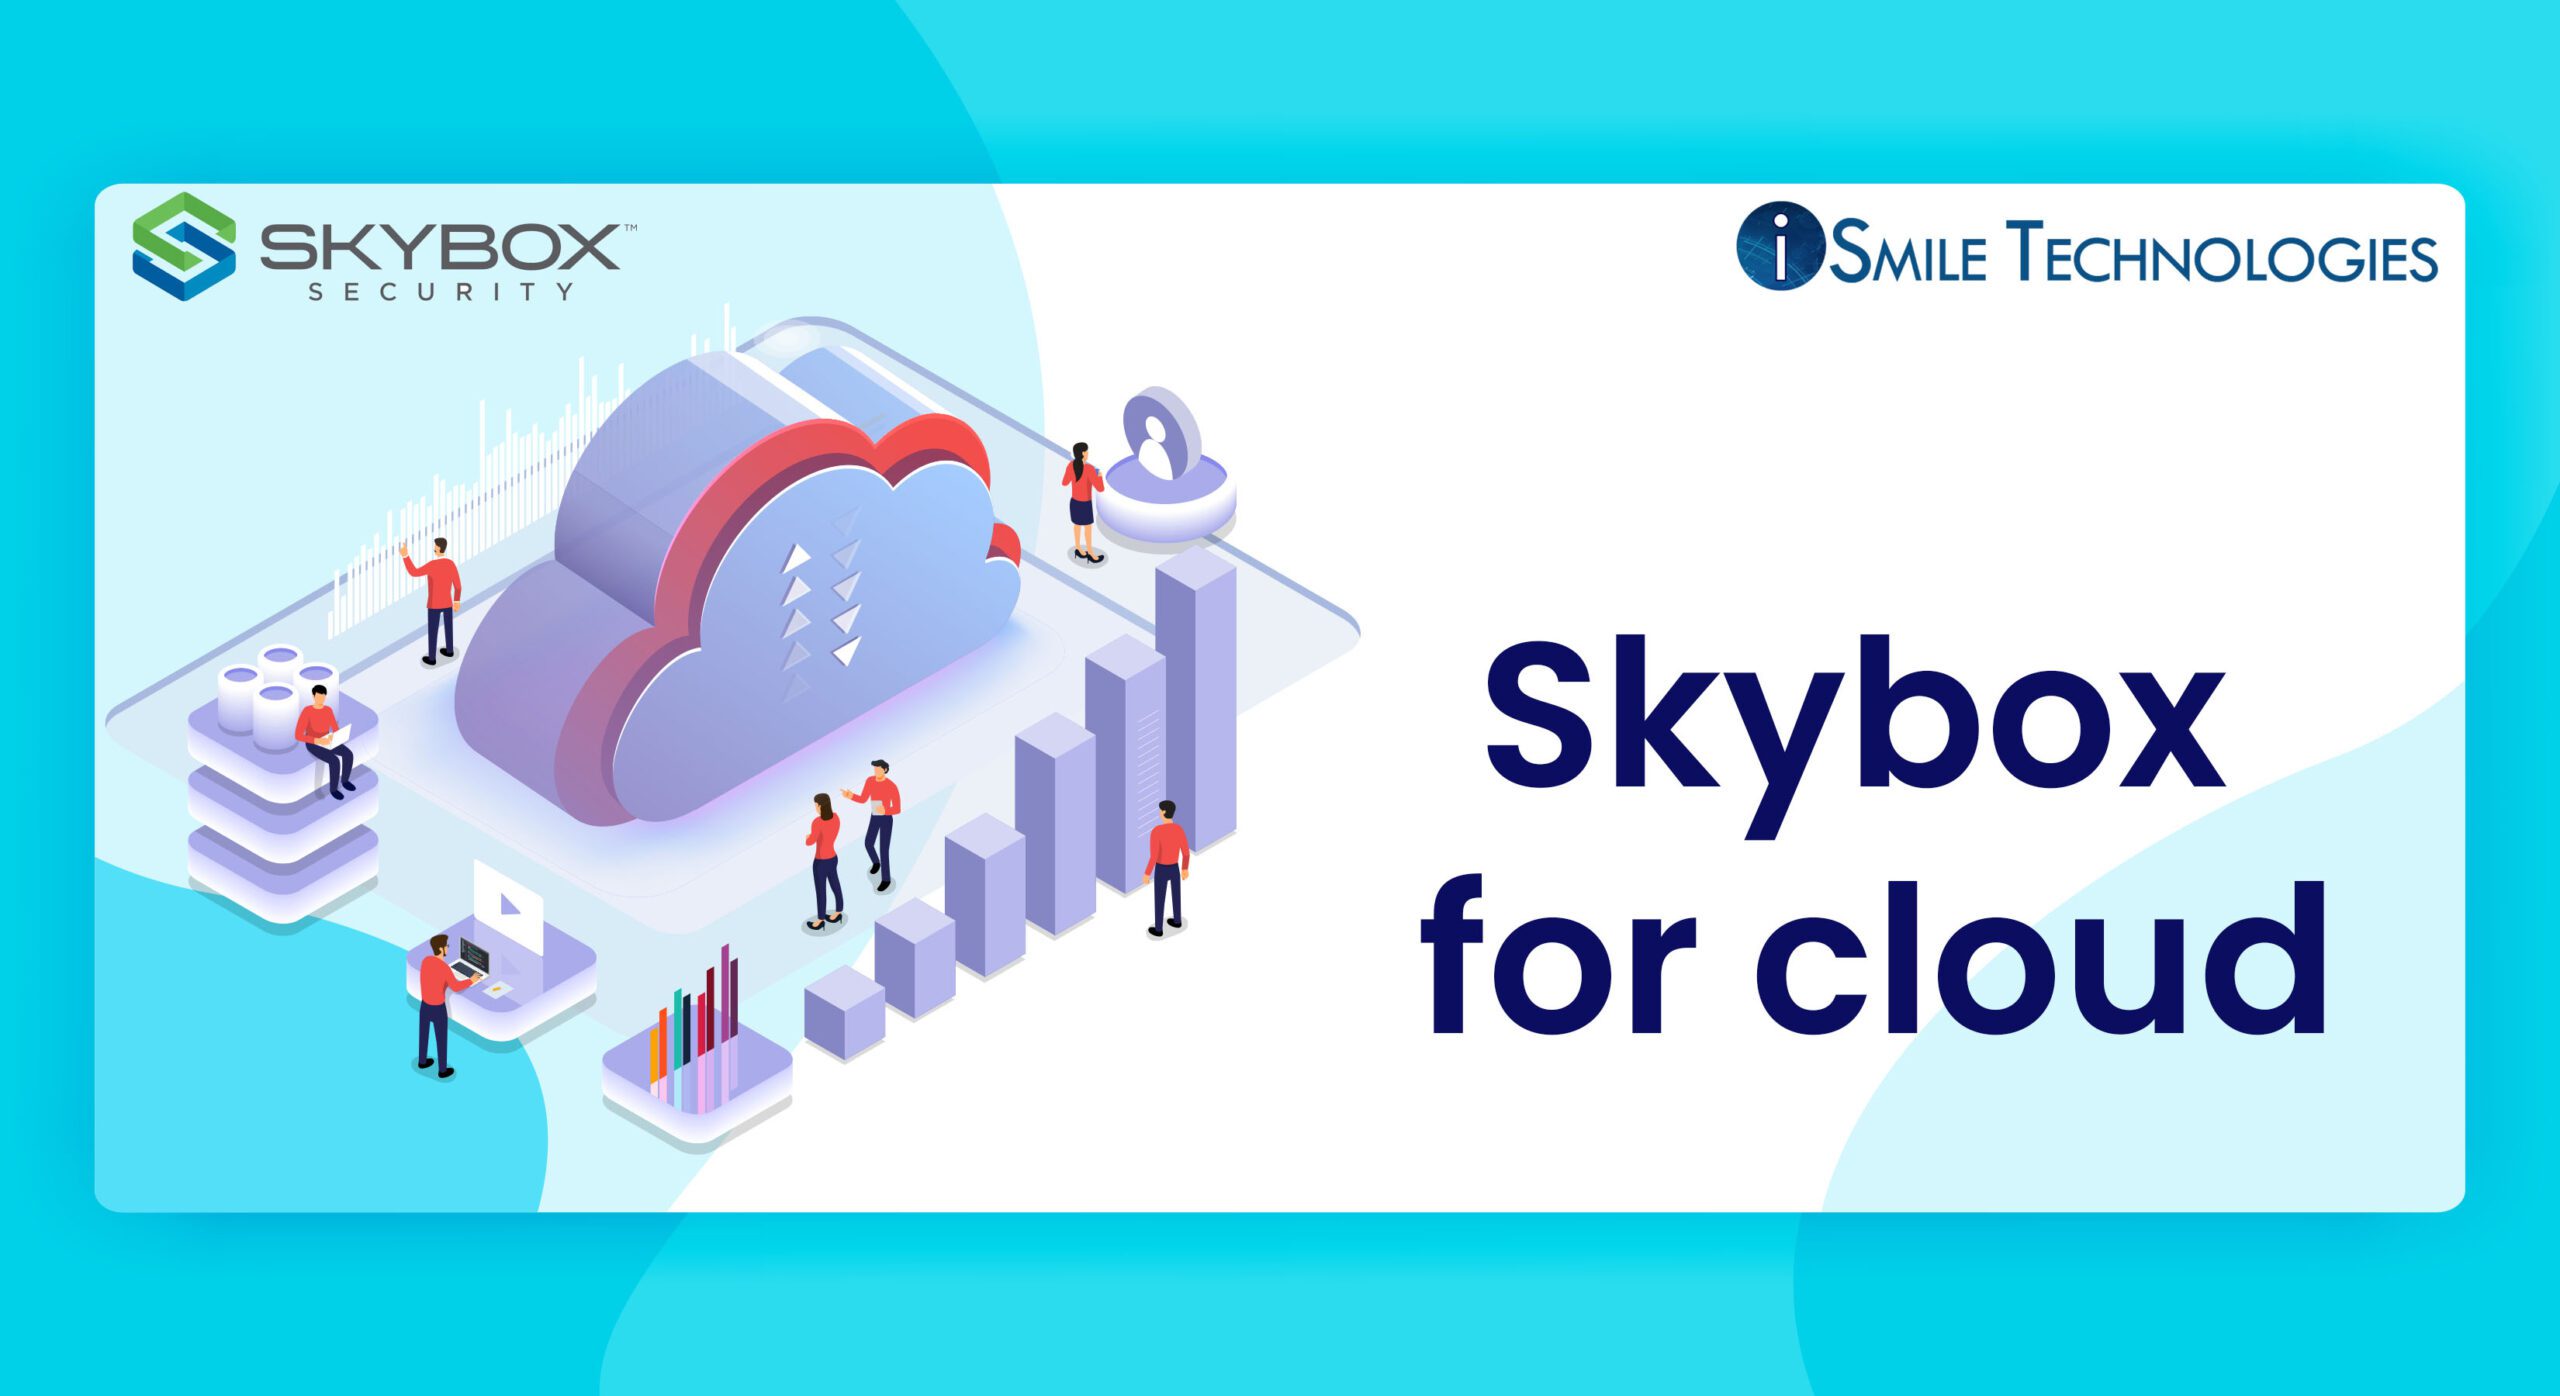 Skybox for cloud